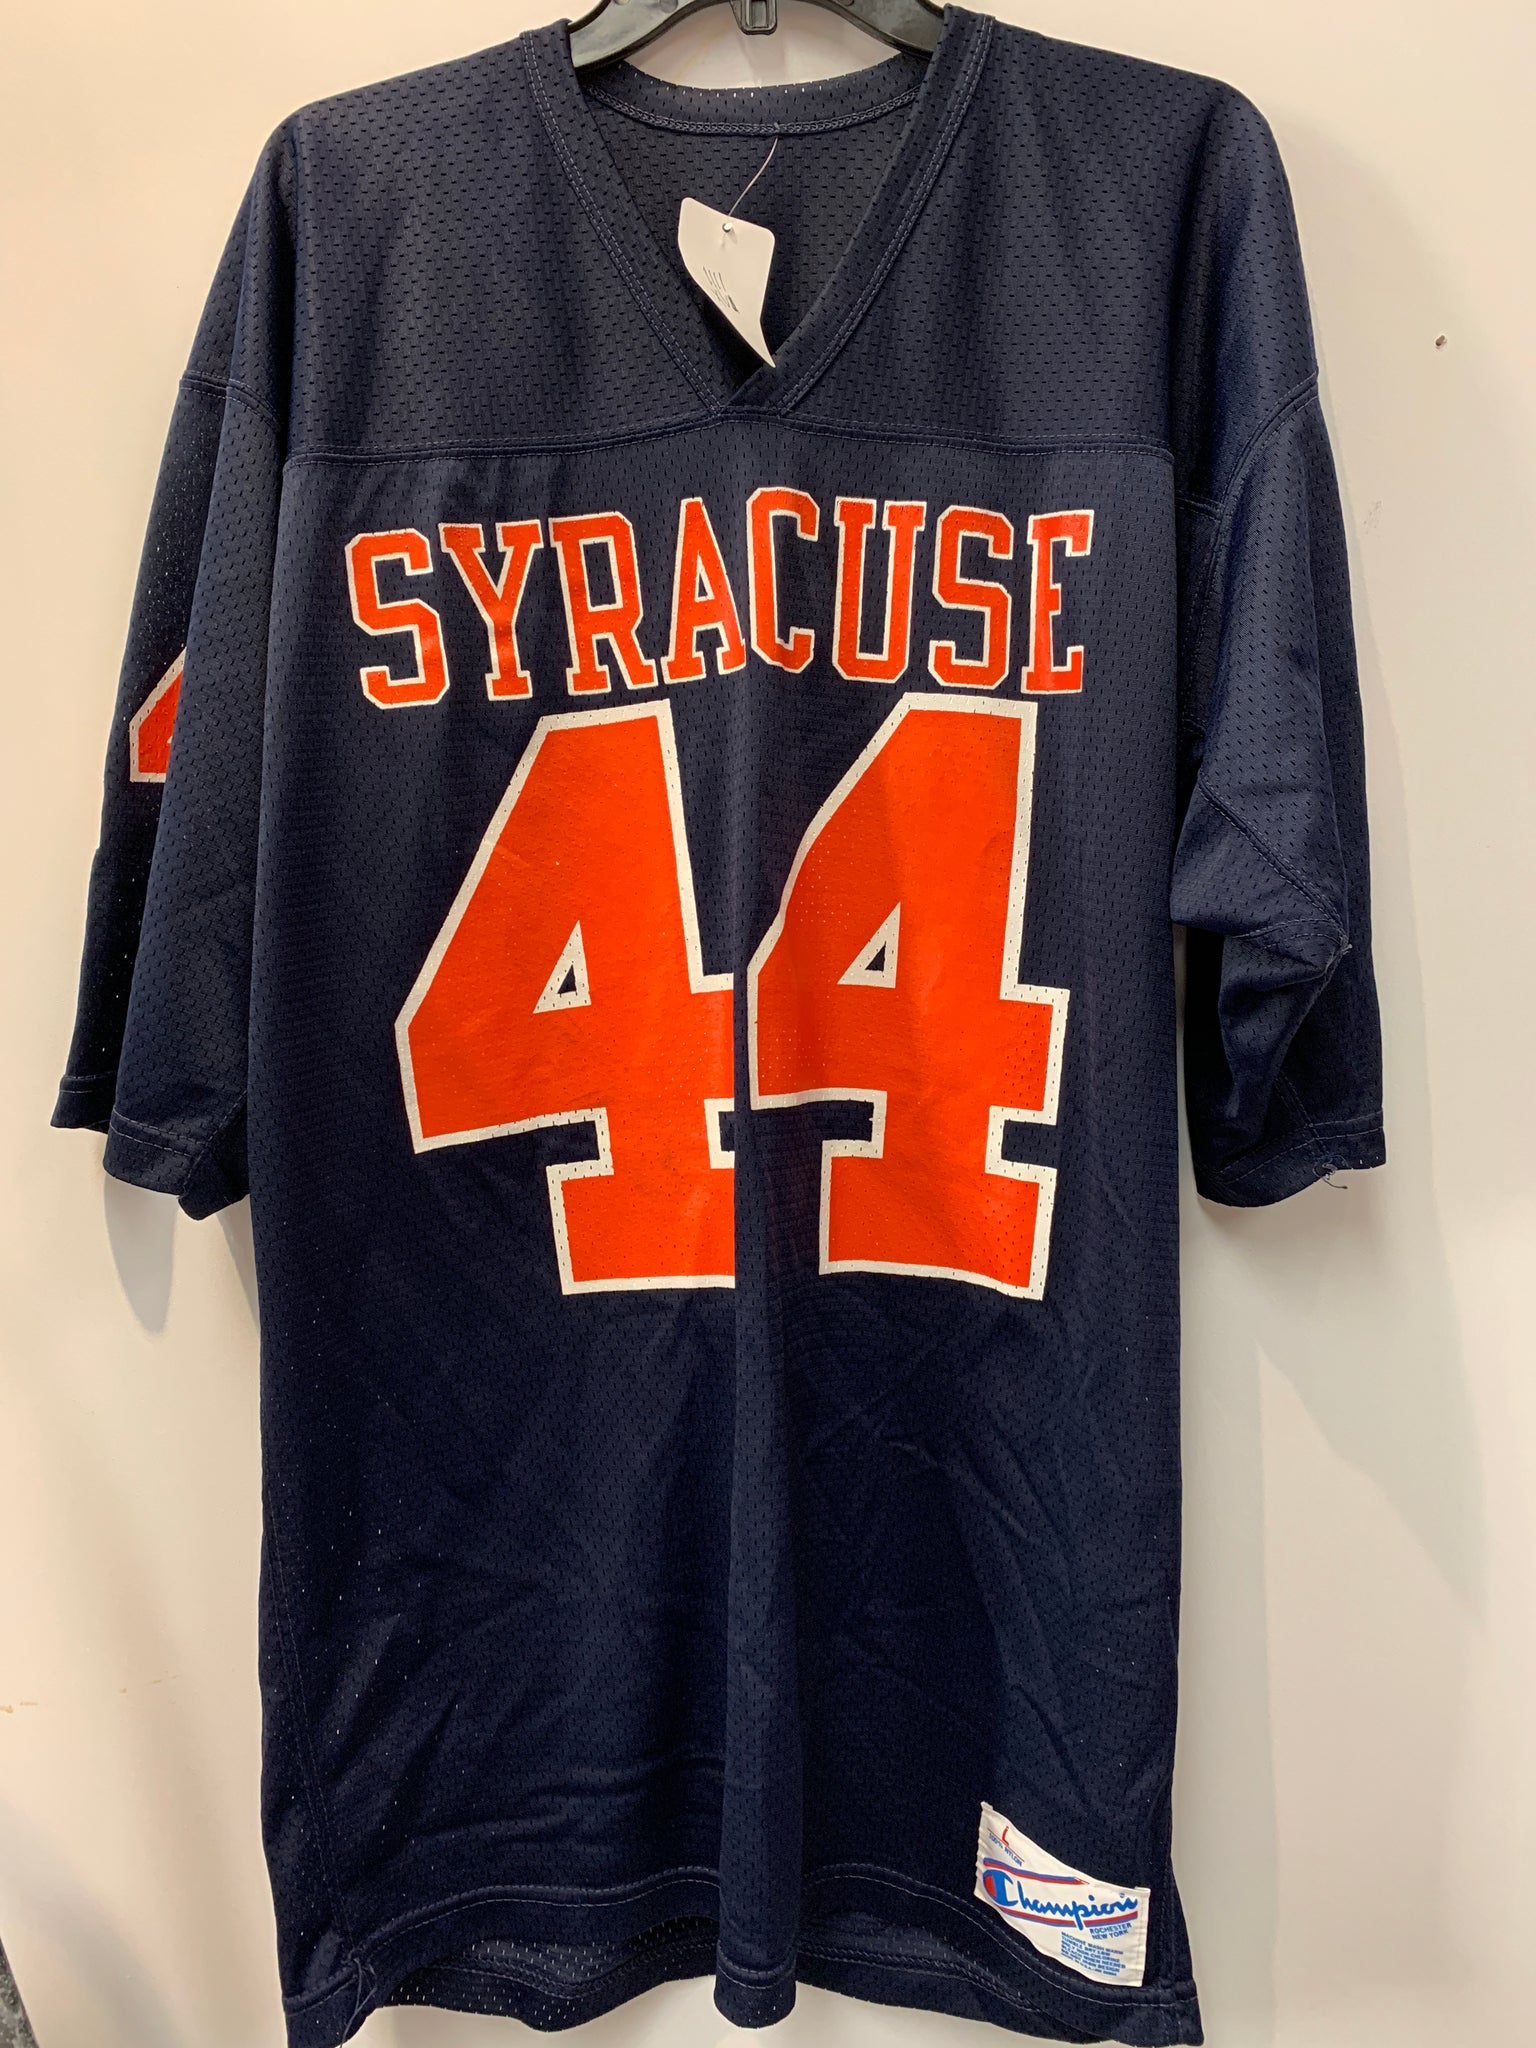 Vintage Champion Syracuse Football Jersey #44 Large Made in USA